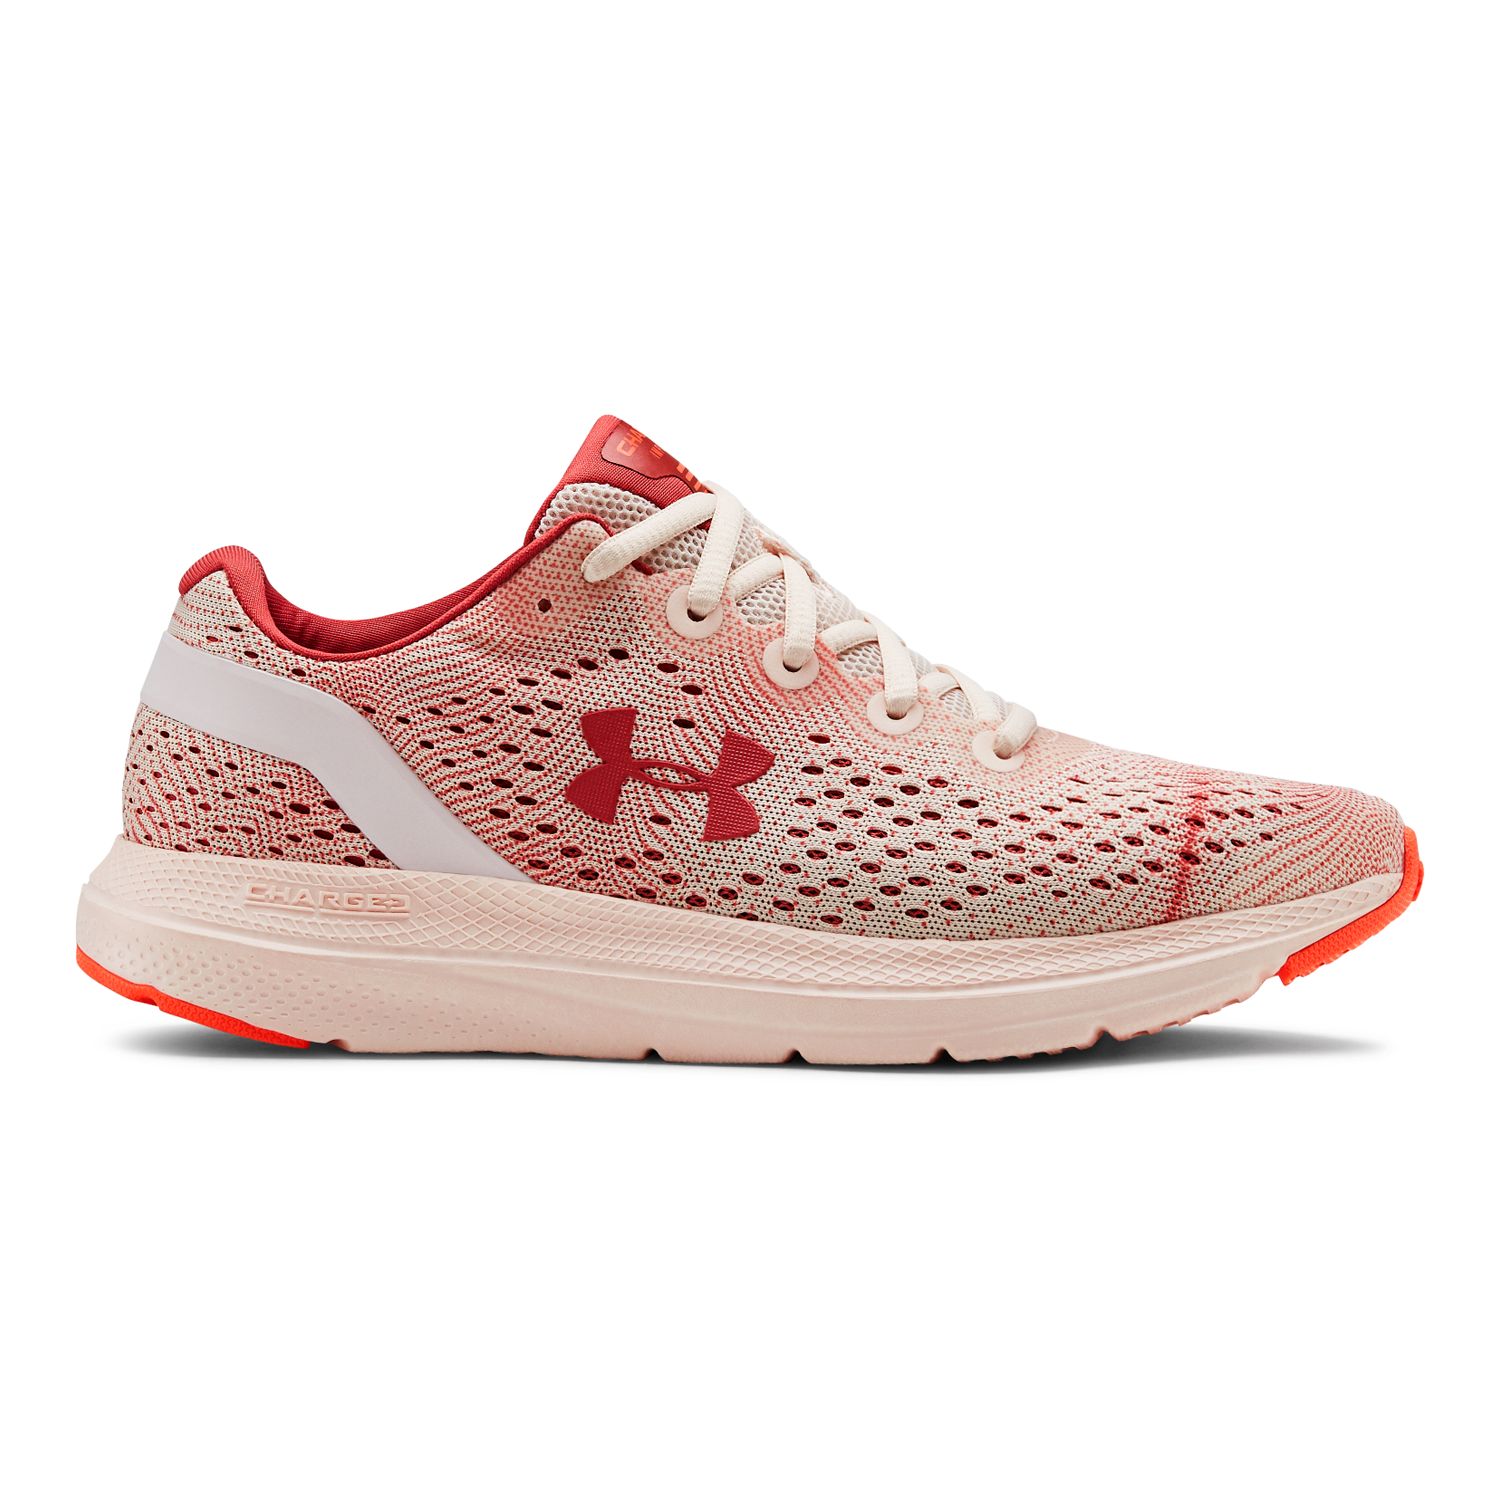 under armour women's athletic shoes